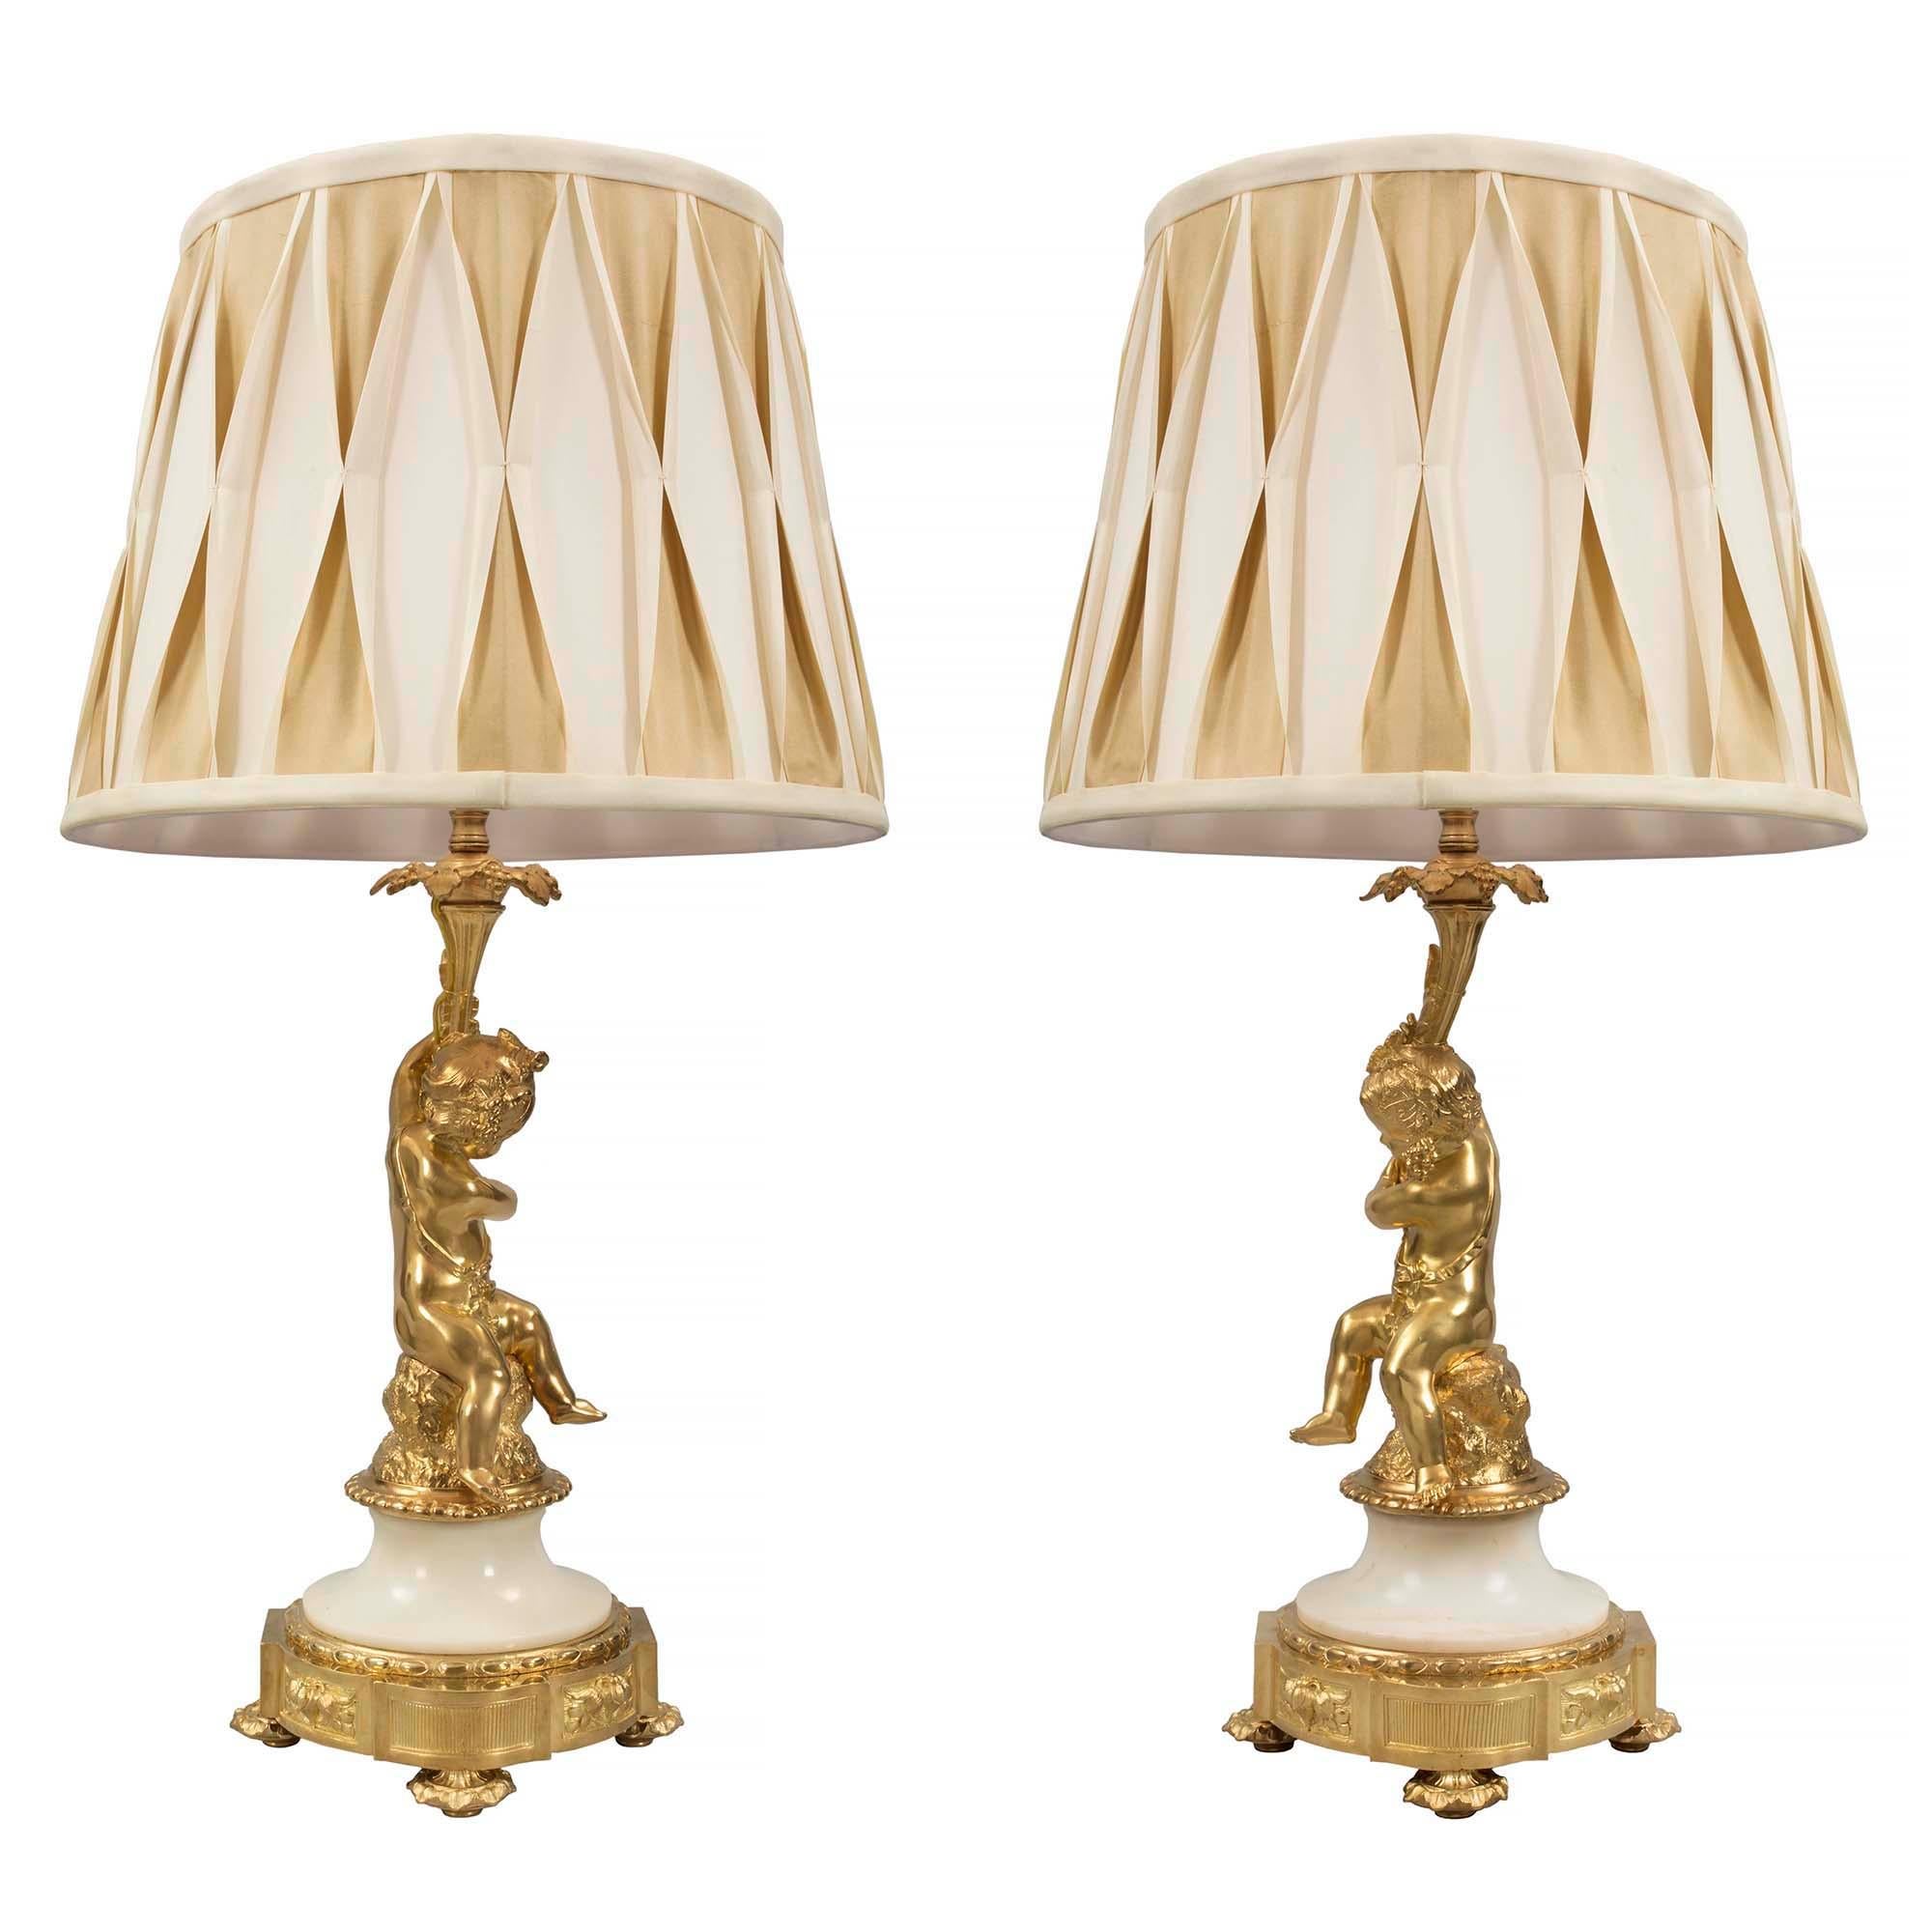 A wonderful pair of whimsical French 19th century Louis XVI st. ormolu and marble lamps. Each lamp is raised on a foliate topie feet below the circular base with protruding rectangular blocks and foliate panels. Above the white Carrara marble socle